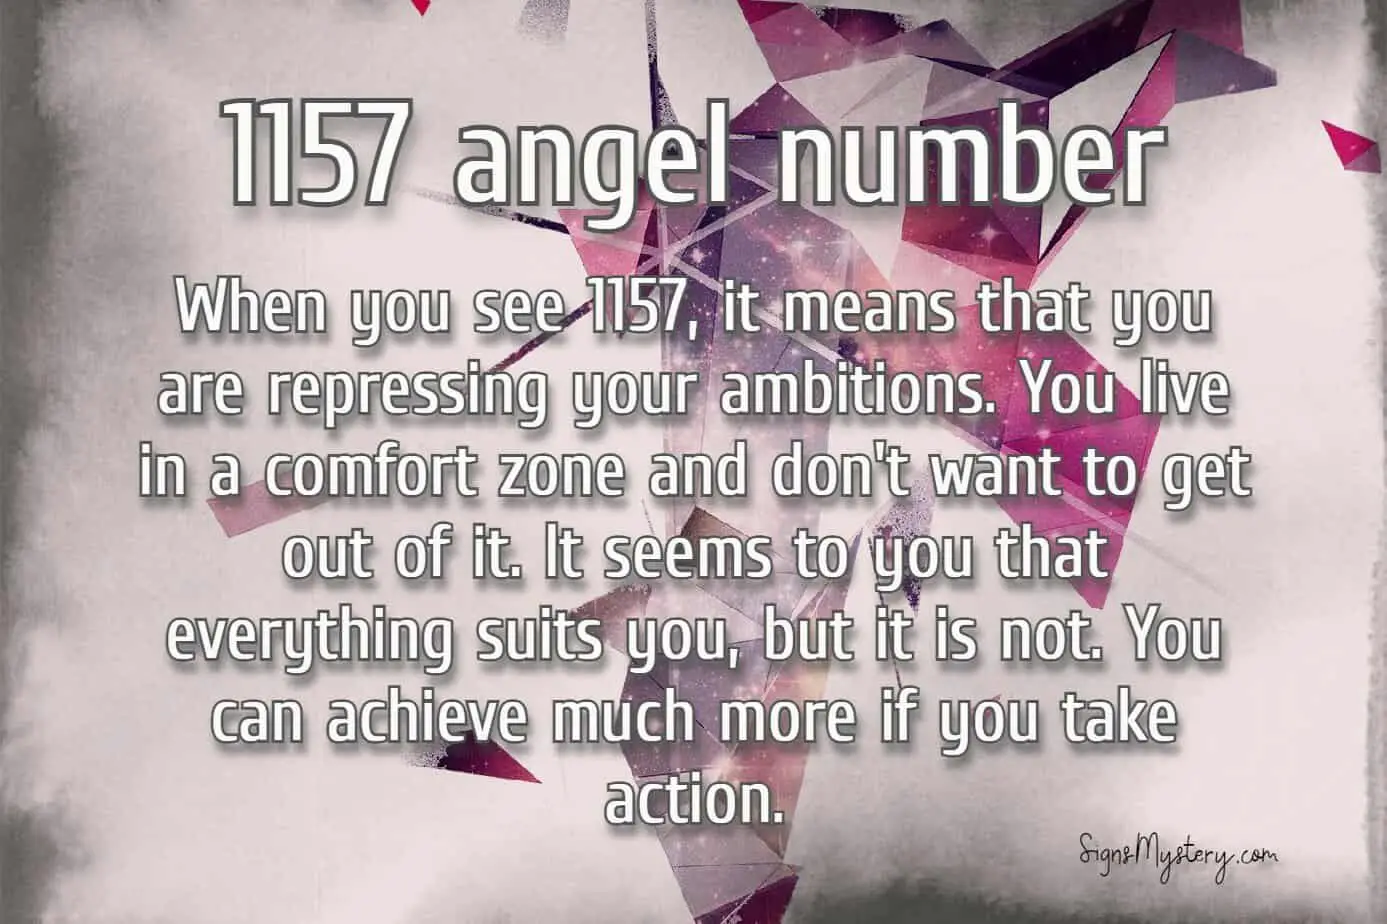 1157 angel number meaning